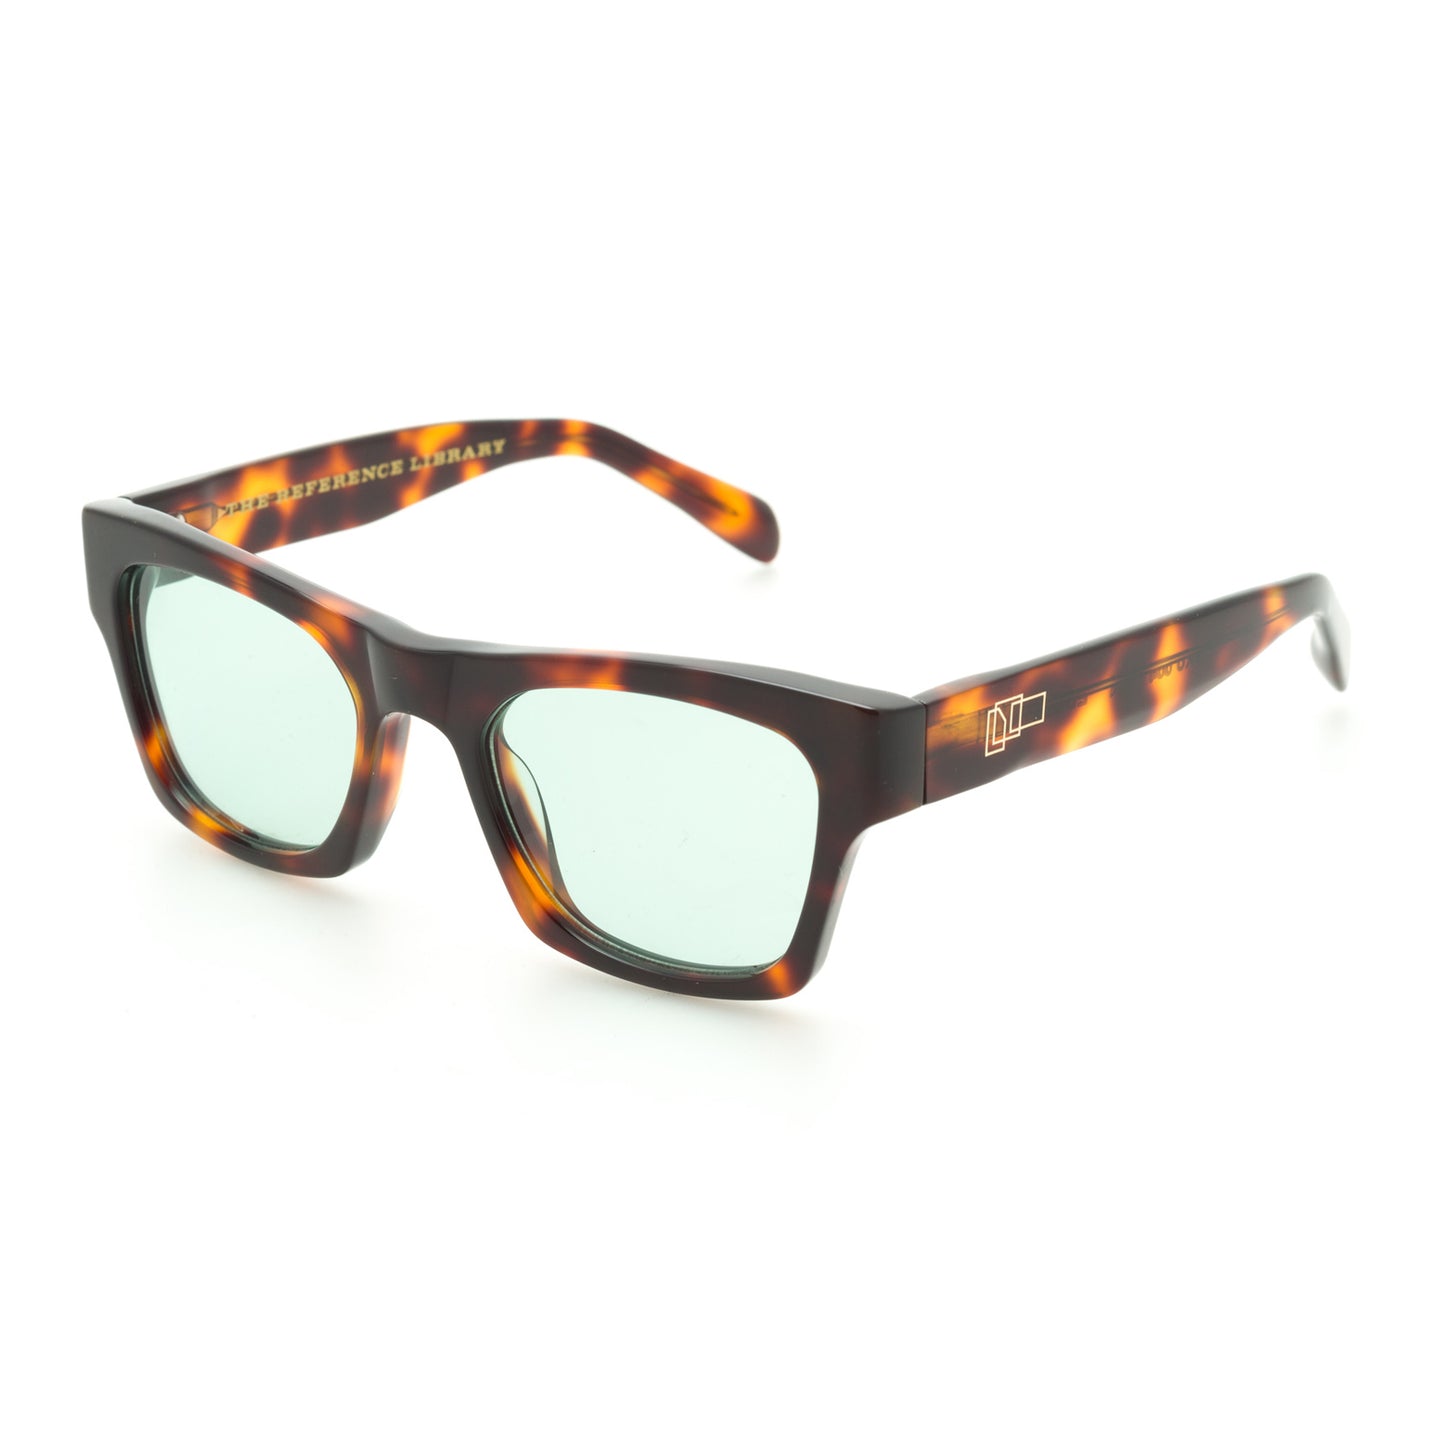 The Reference Library Eddie Sunglasses